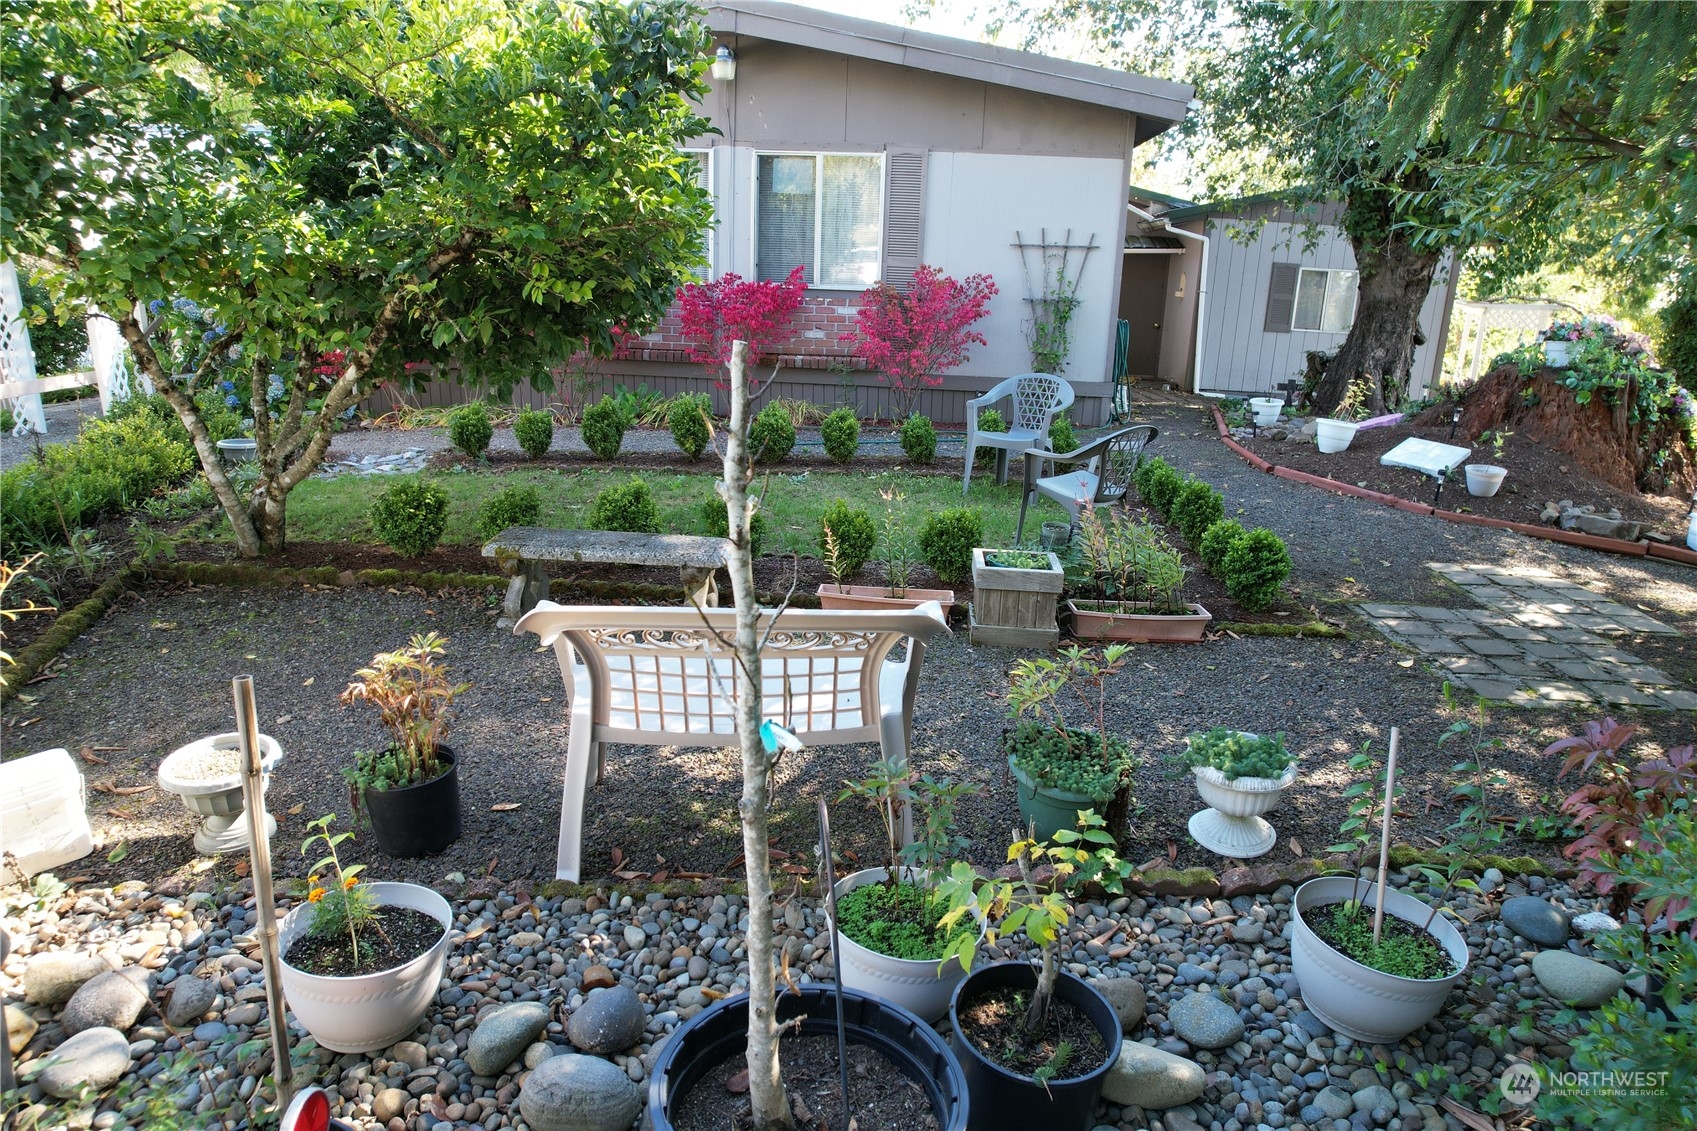 a view of a backyard with garden and sitting area